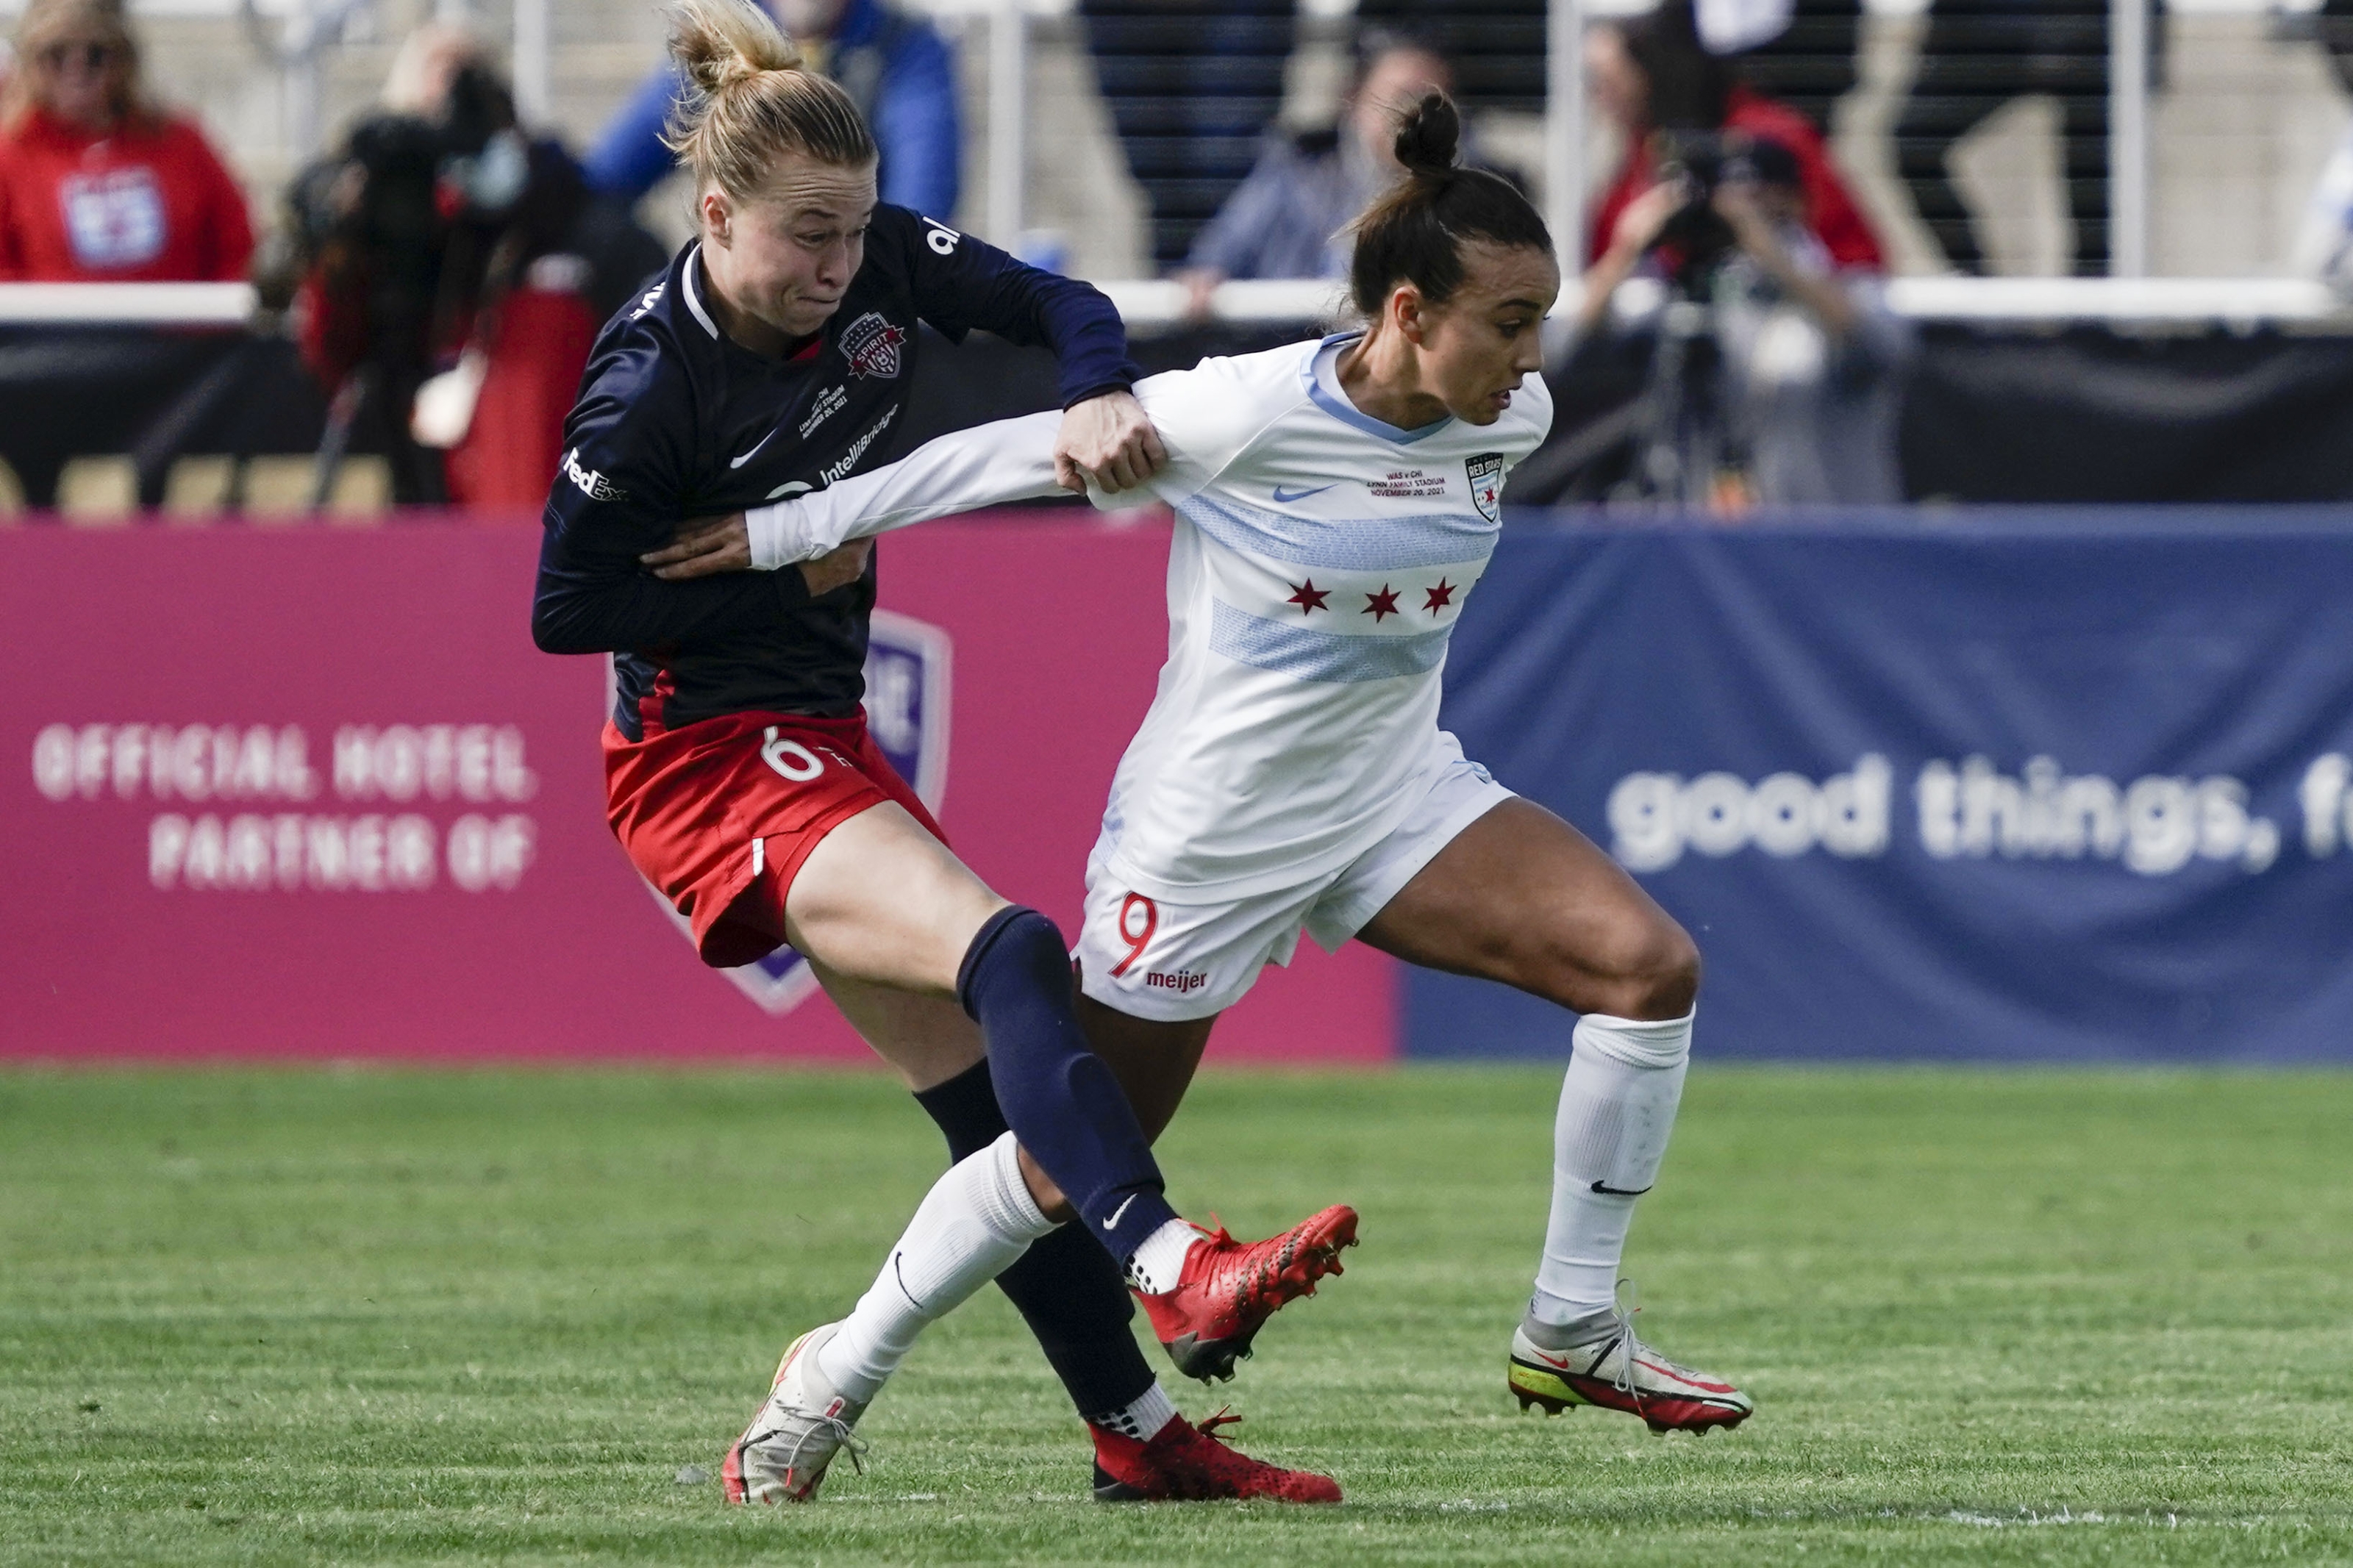 Spirit wins NWSL title 2-1 in extra time over Red Stars - WTOP News